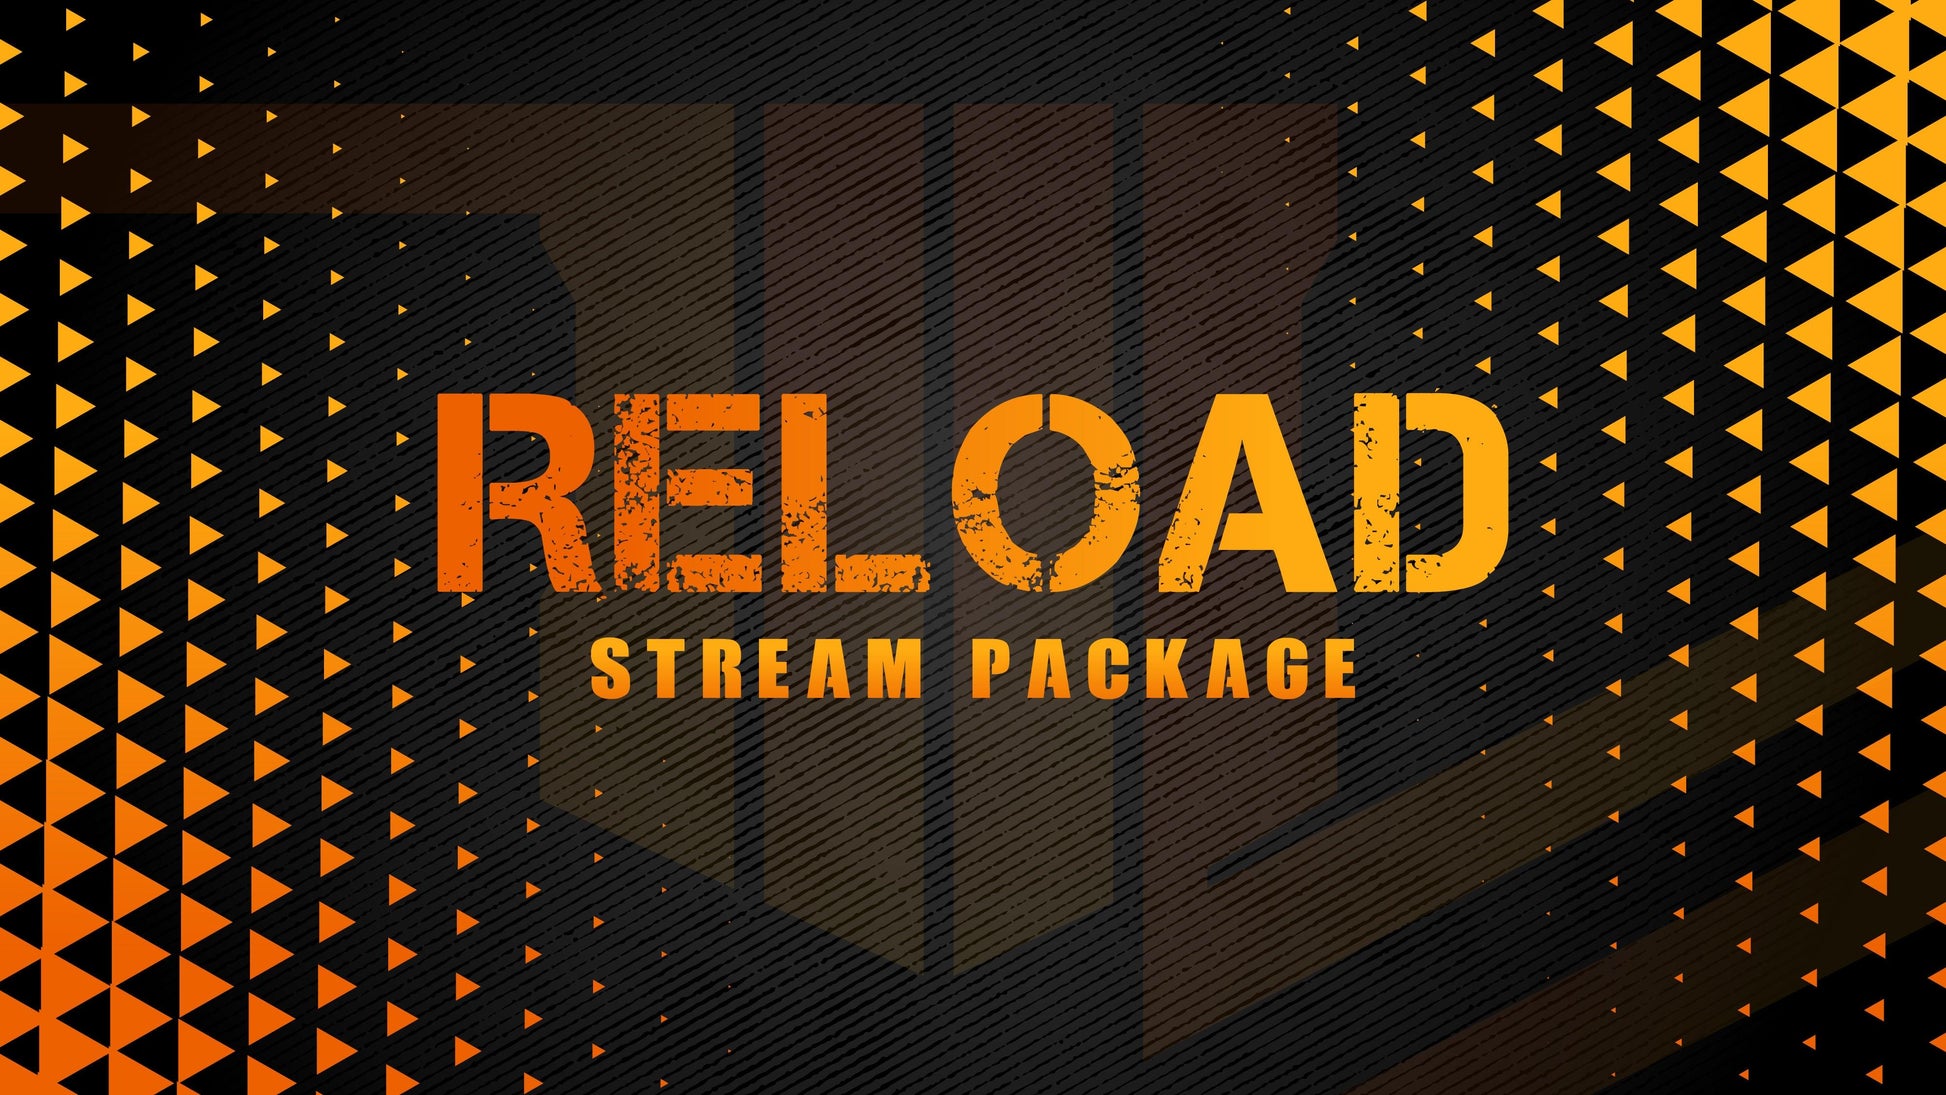 Stream overlay package reload thumbnail stream designz